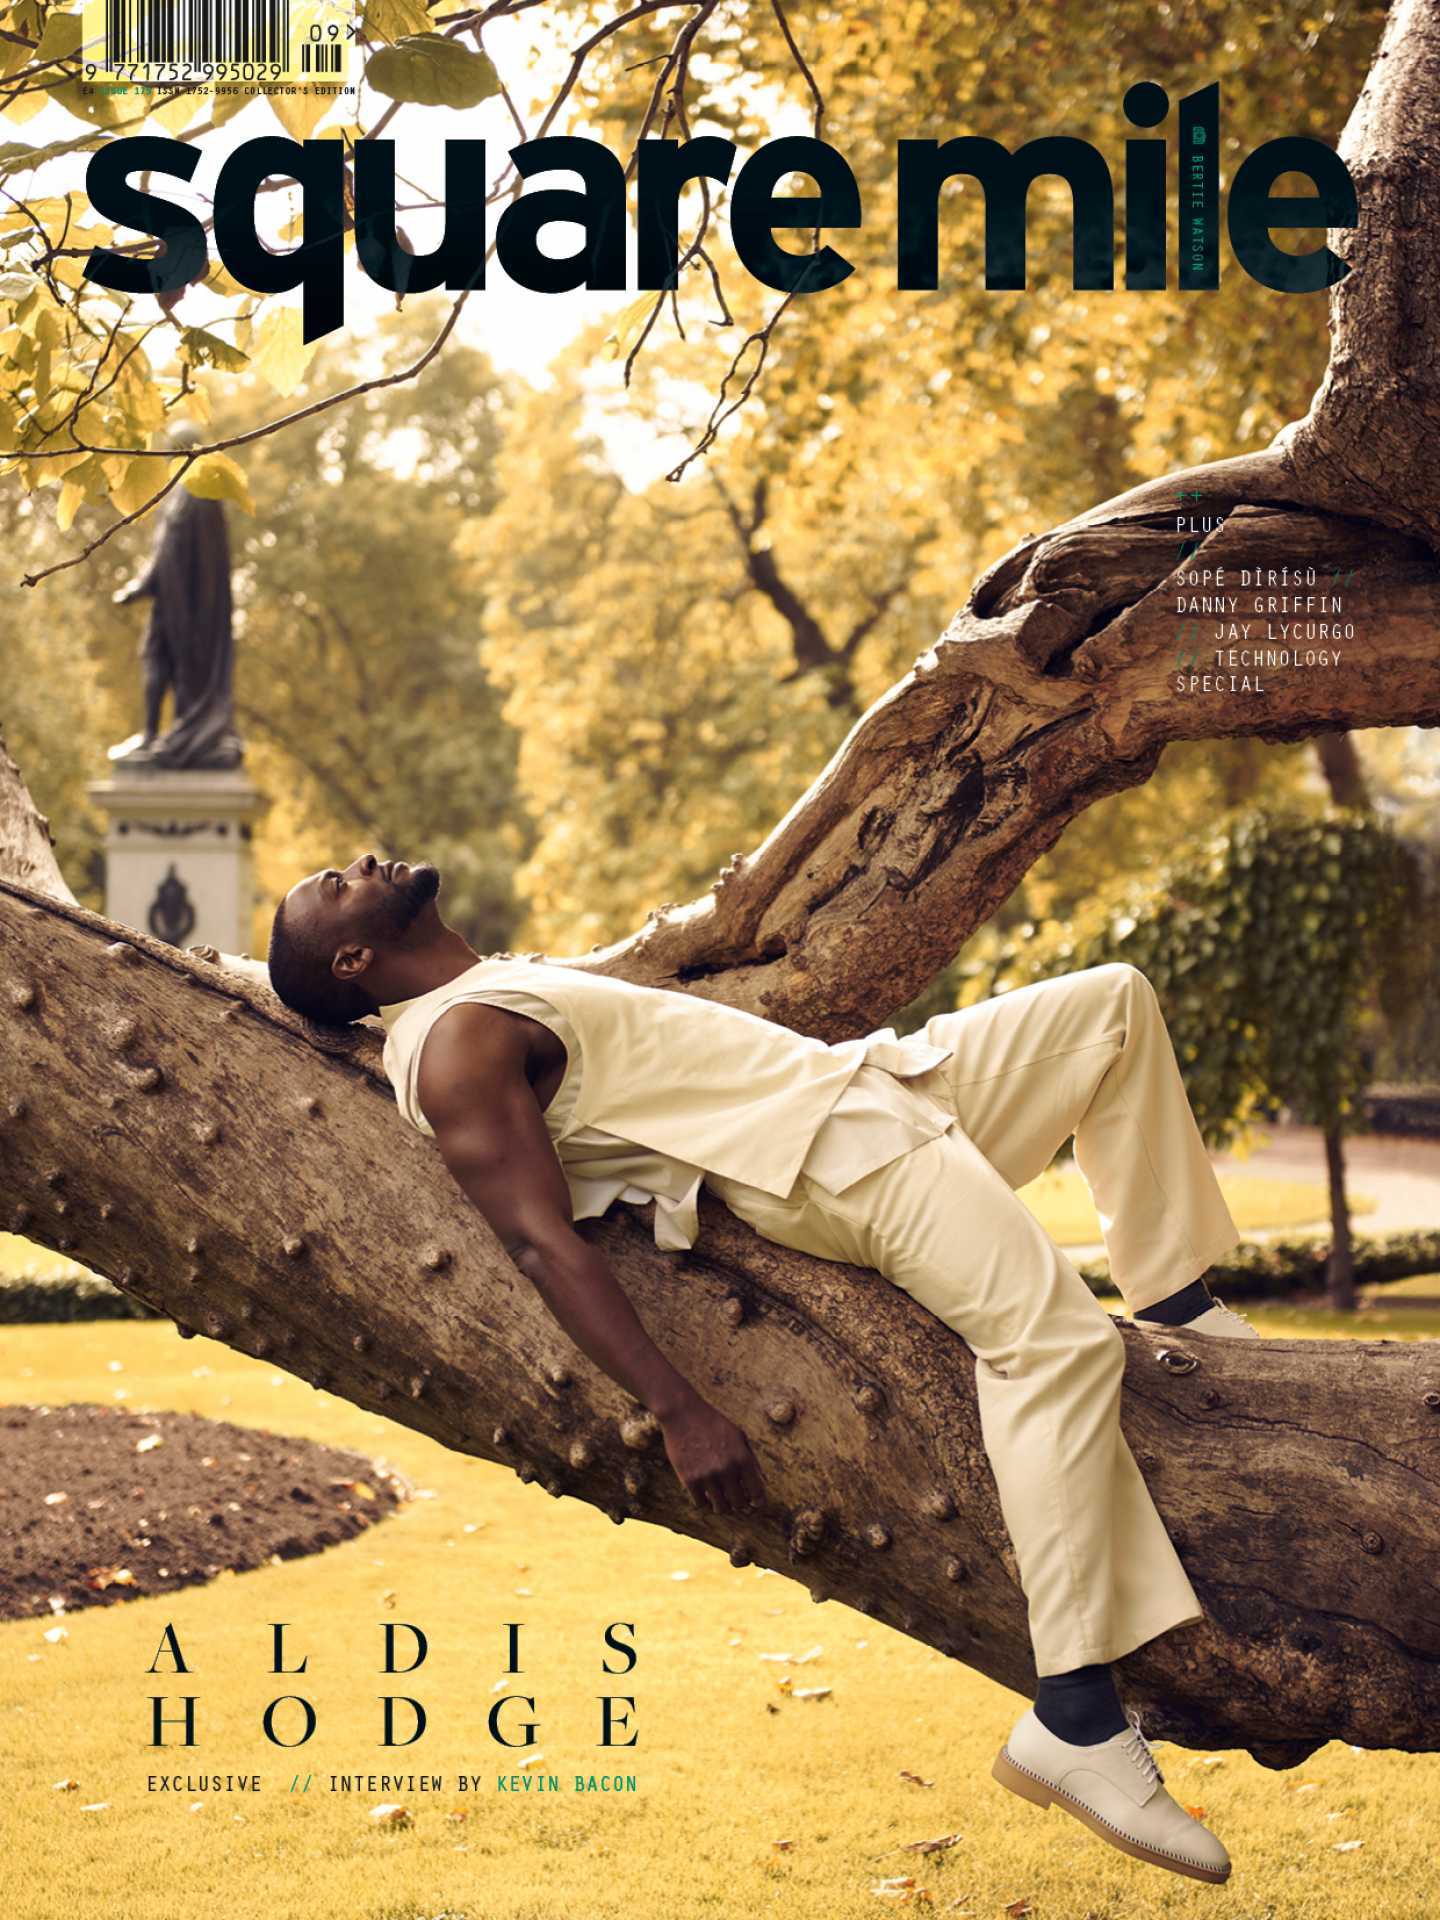 Aldis Hodge photographed for Square Mile by Bertie Watson